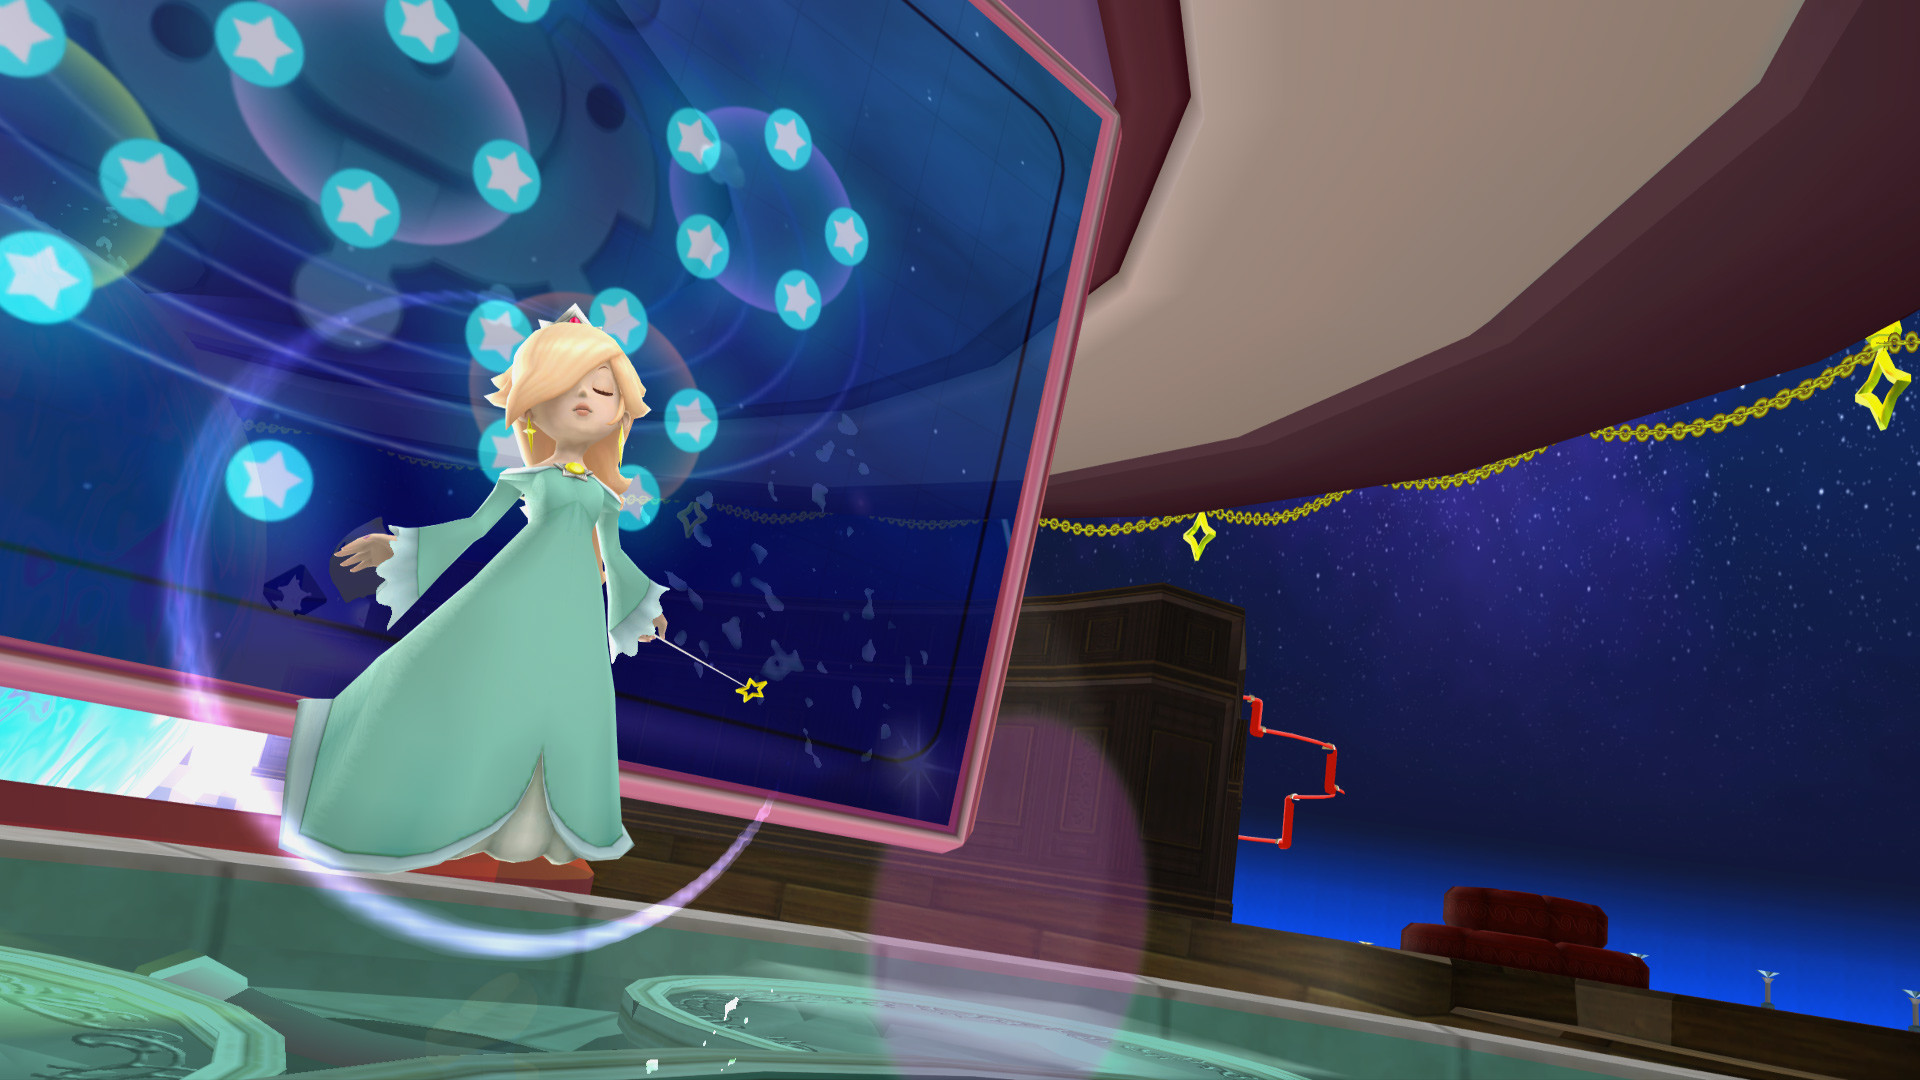 Rosalina creates a protective bubble to shield herself from attacks.